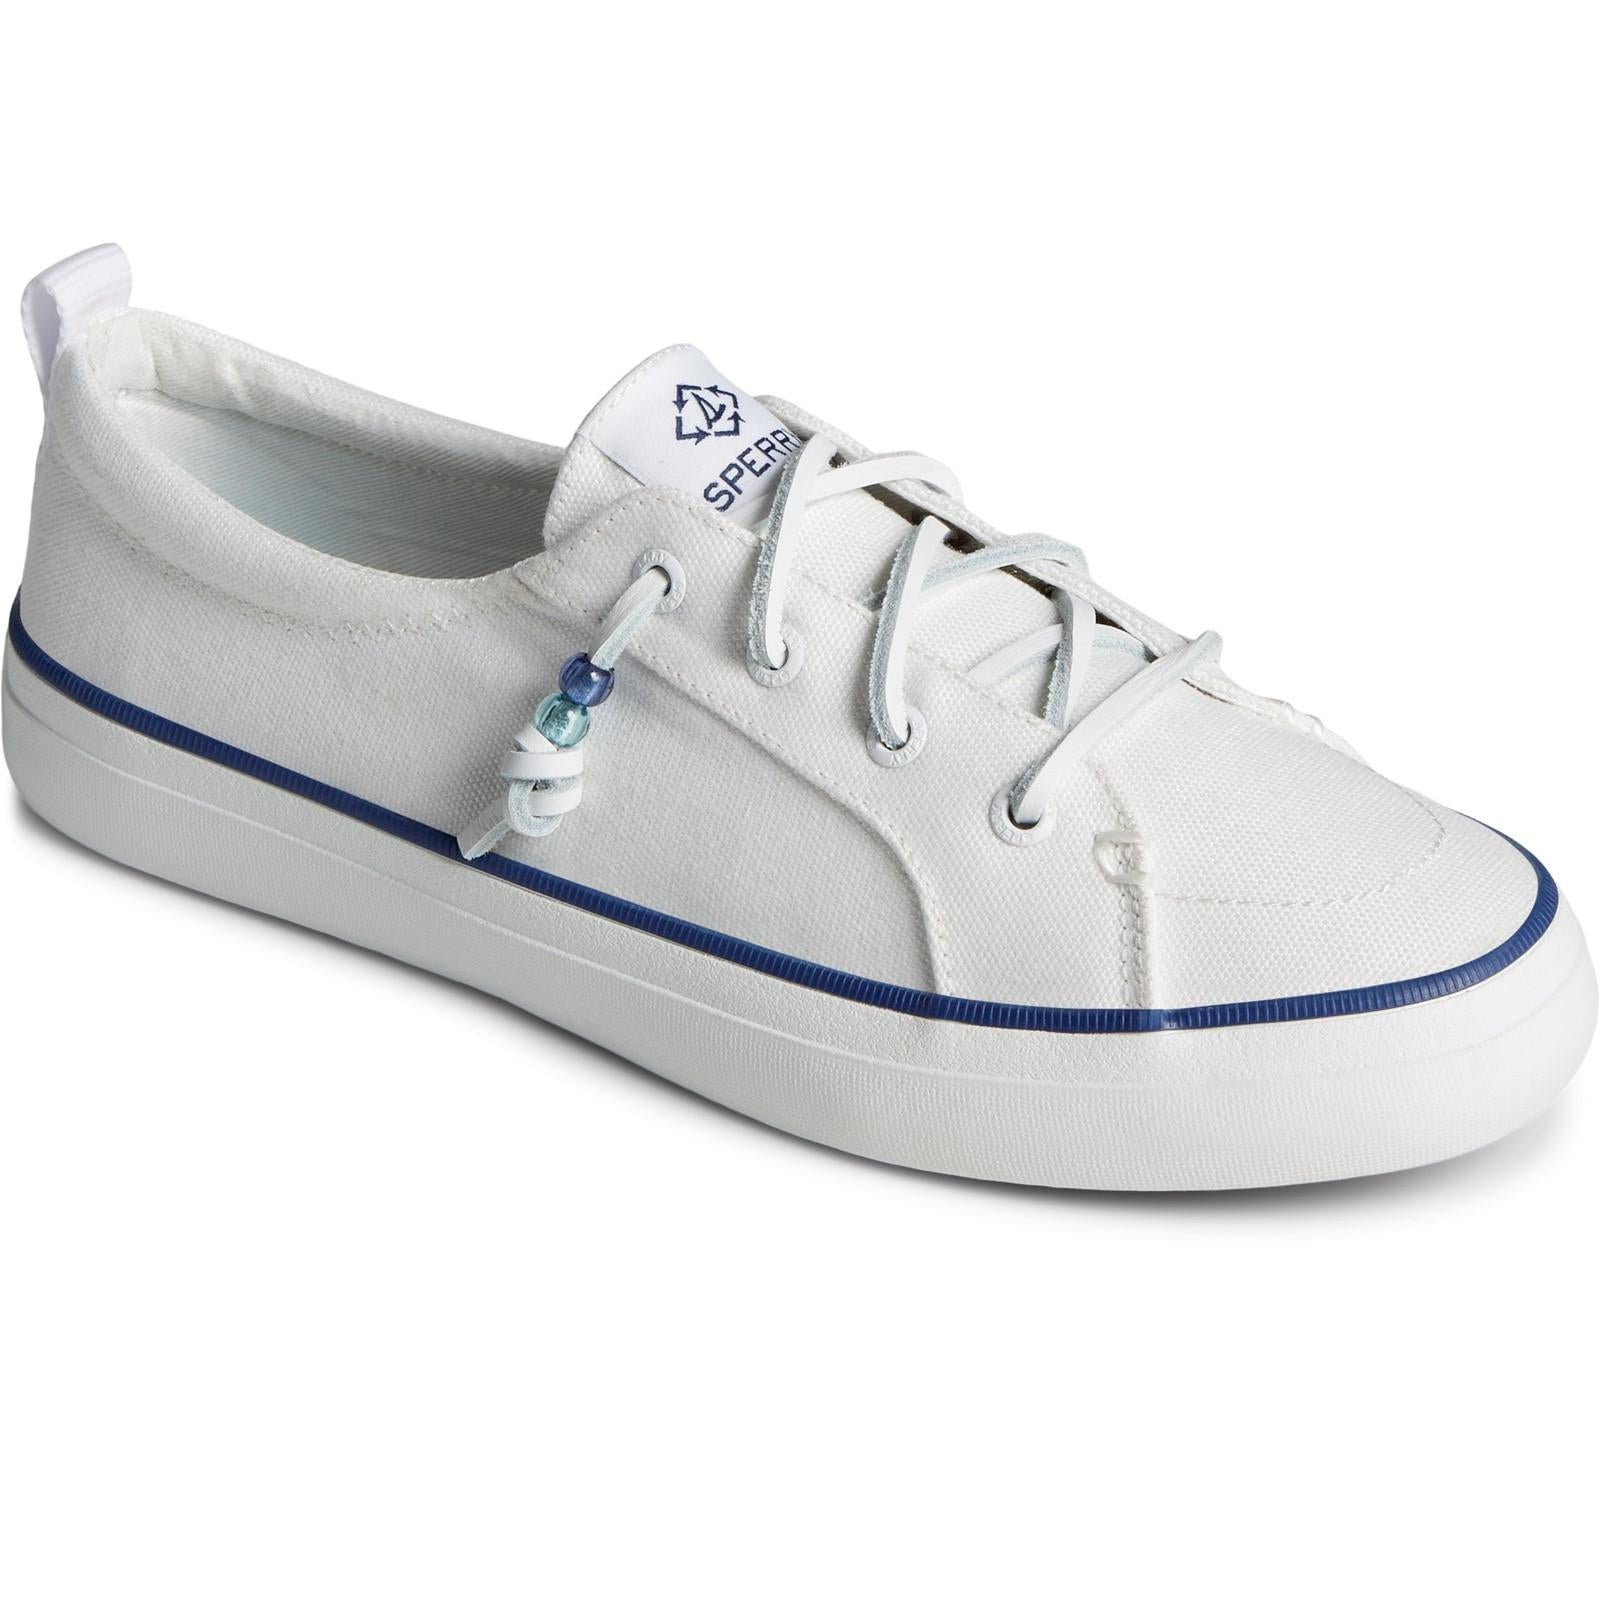 Sperry Top-sider Crest Vibe Shoes